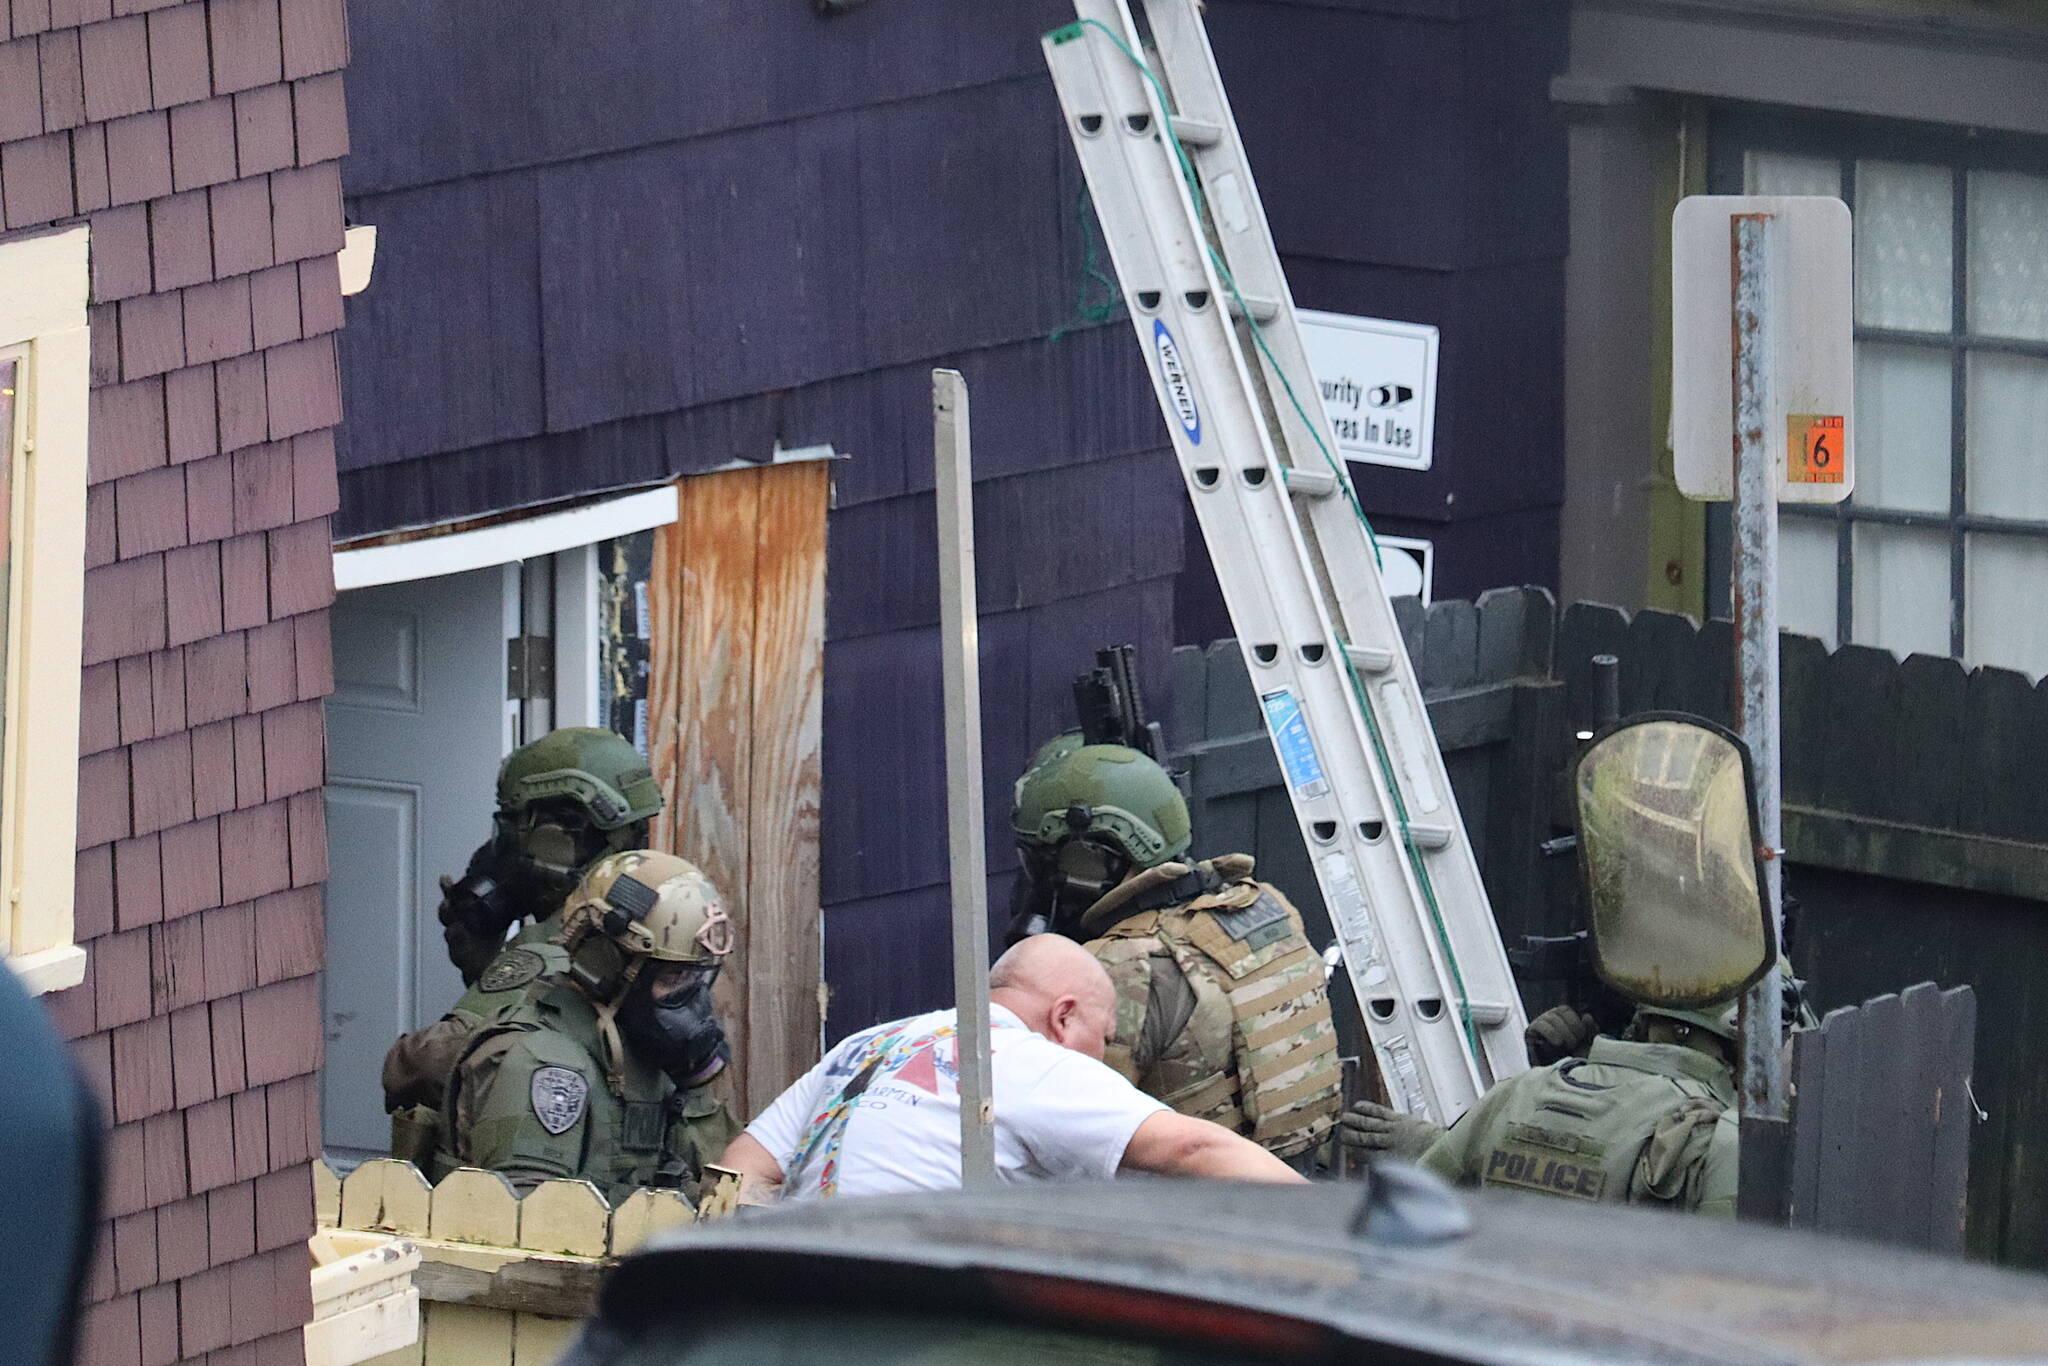 Kenneth Kitka, 65, is taken into custody following a nearly three-hour standoff with police at a downtown Juneau residence on Thursday. (Mark Sabbatini / Juneau Empire)